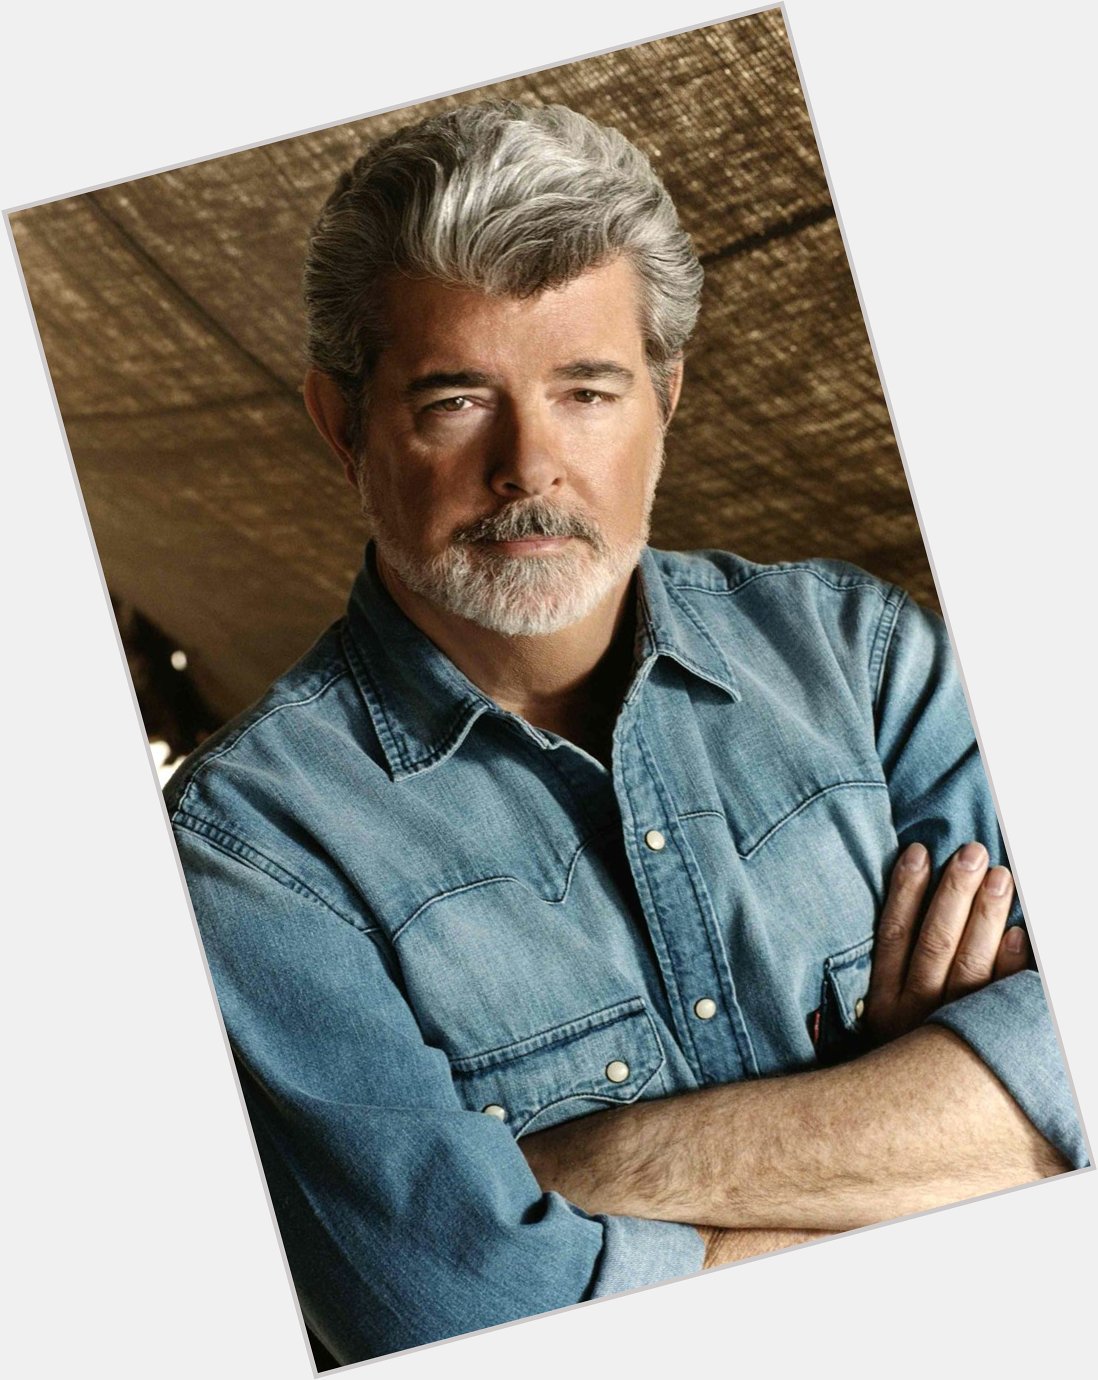 Happy birthday to the man who gave us on of the greatest movie franchises of all time, George Lucas 